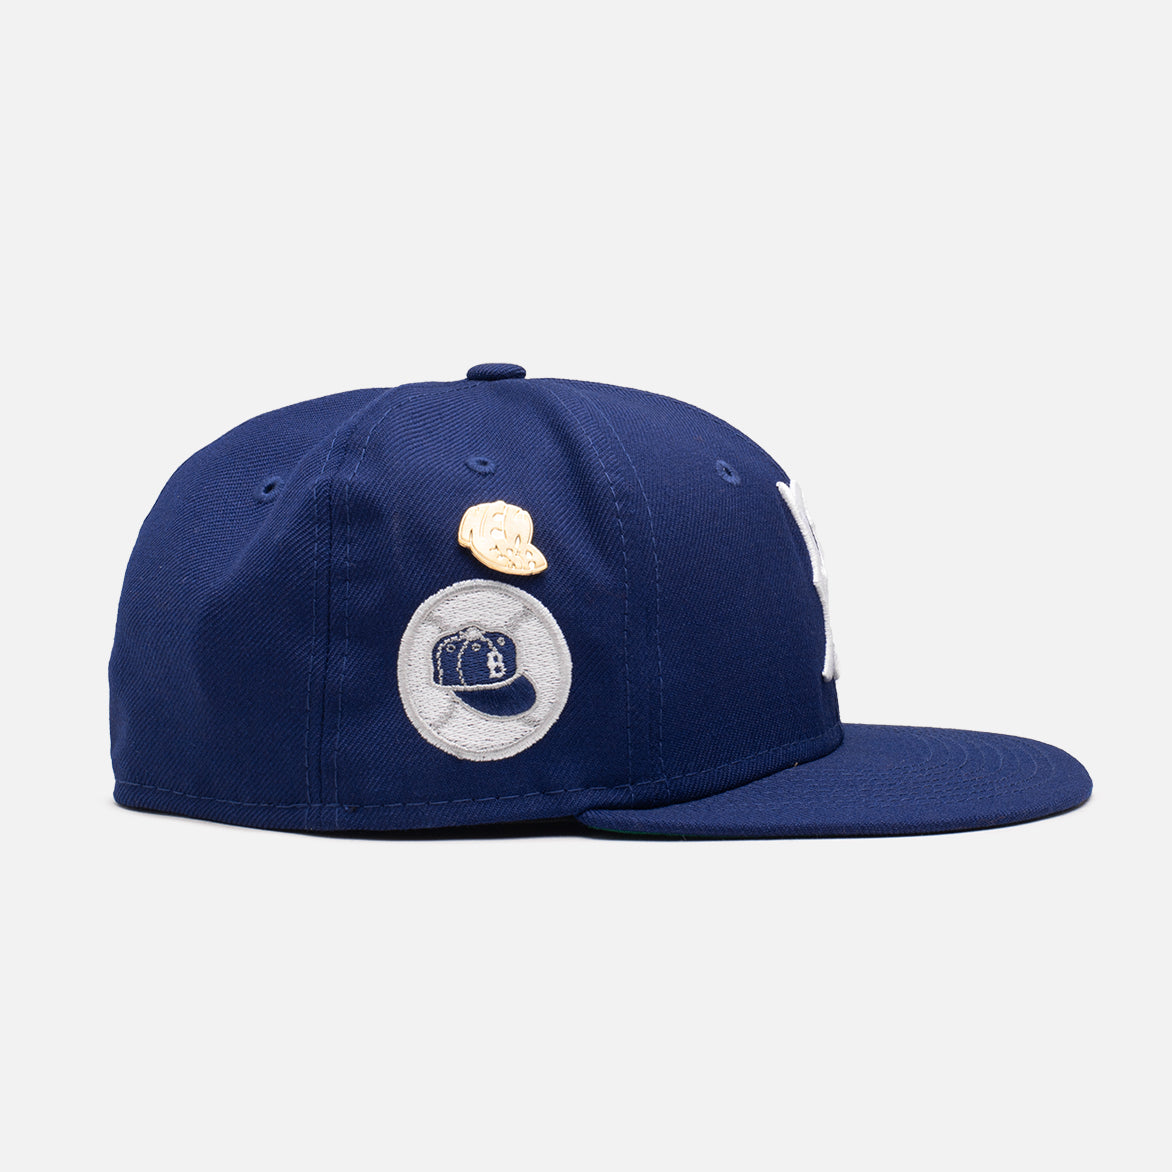 WORLD SERIES COLLECTION 5950 FITTED HAT "BROOKLYN DODGERS '55"